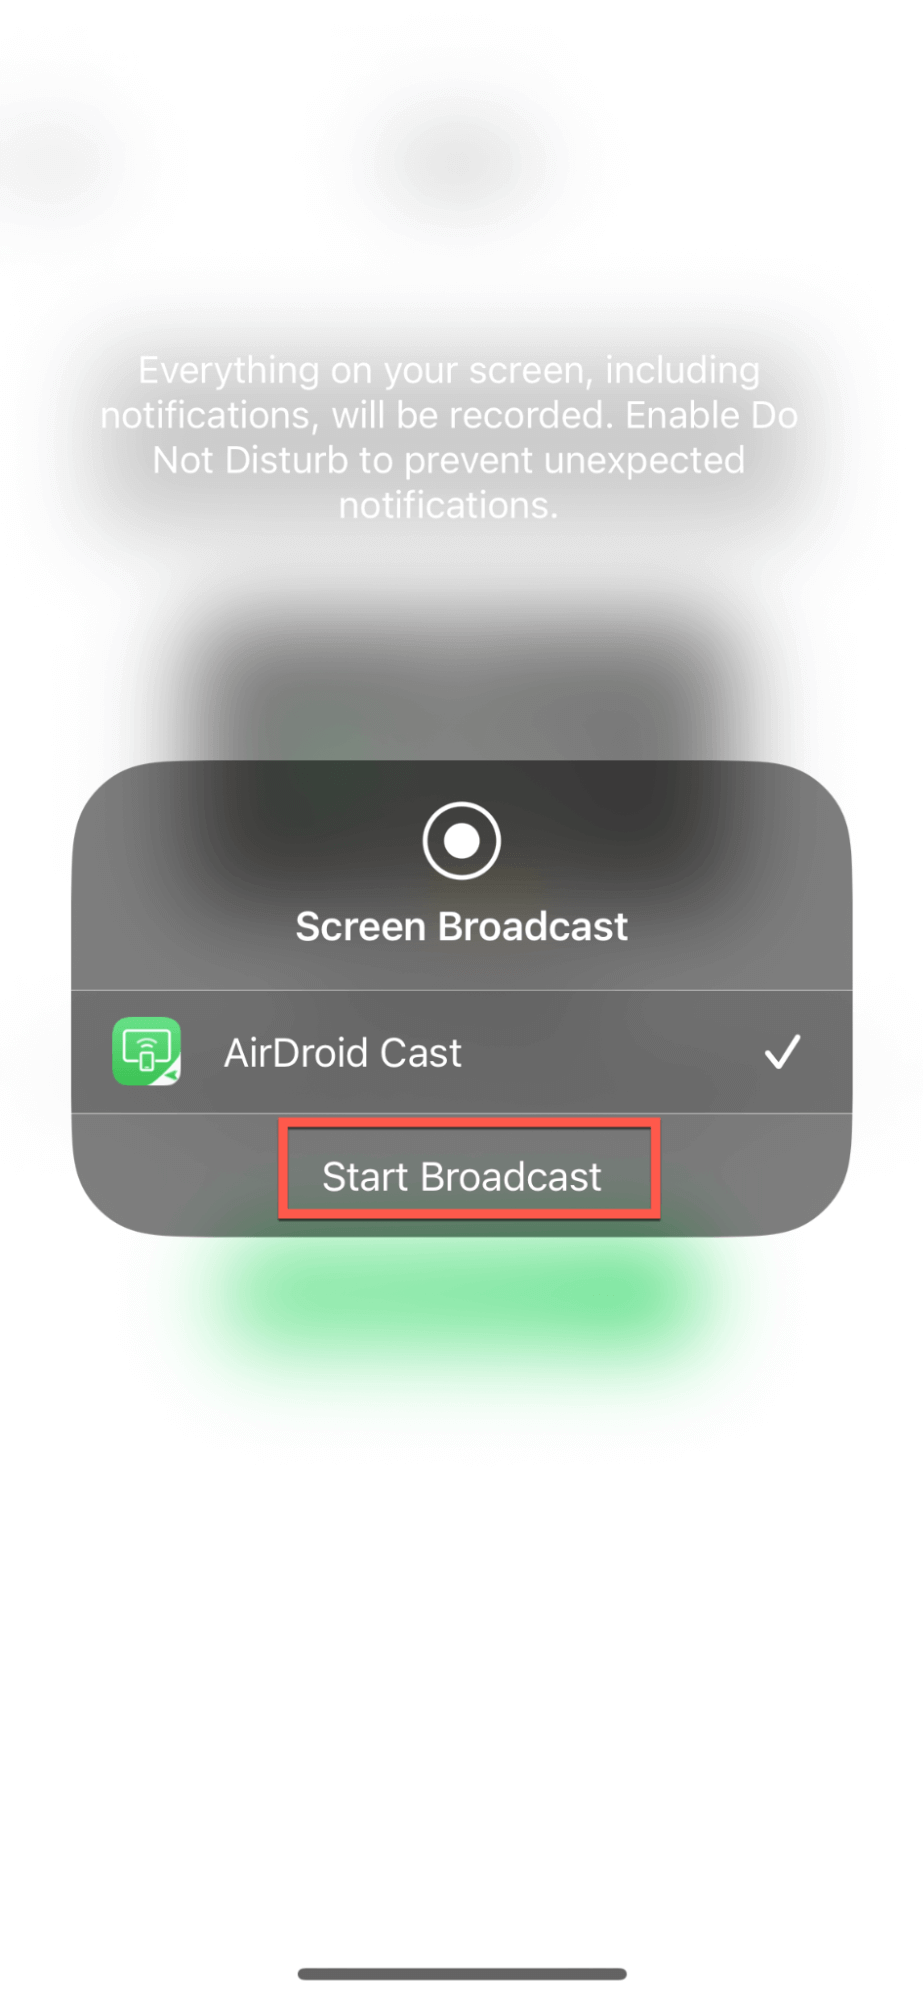 Tap on Start Broadcast button again